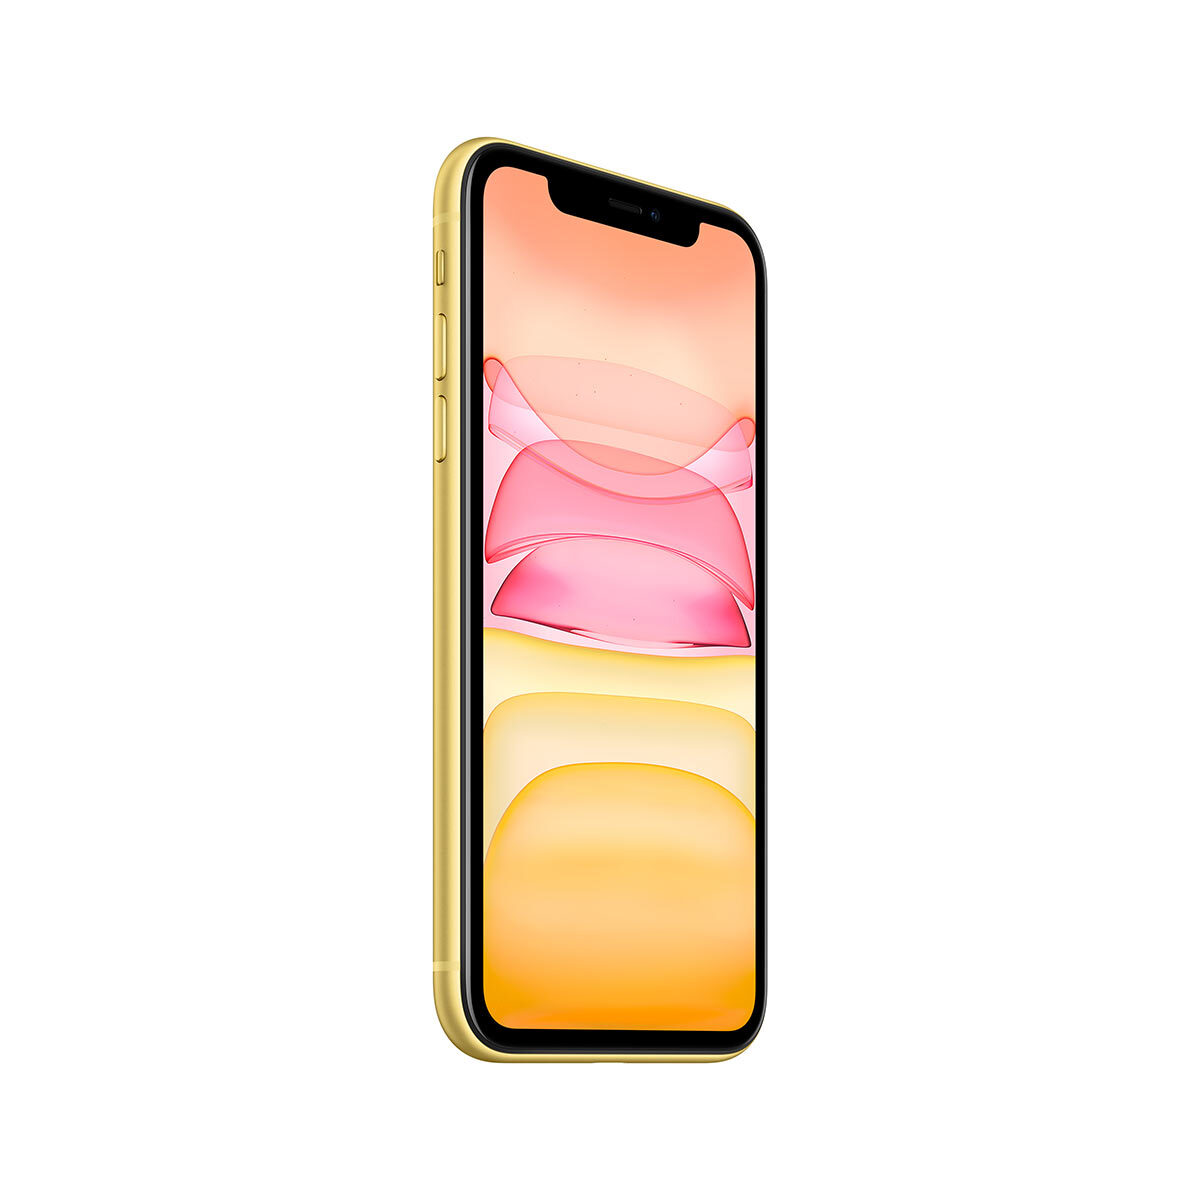 Buy Apple iPhone 11 128GB Sim Free Mobile Phone in Yellow, MHDL3B/A at costco.co.uk